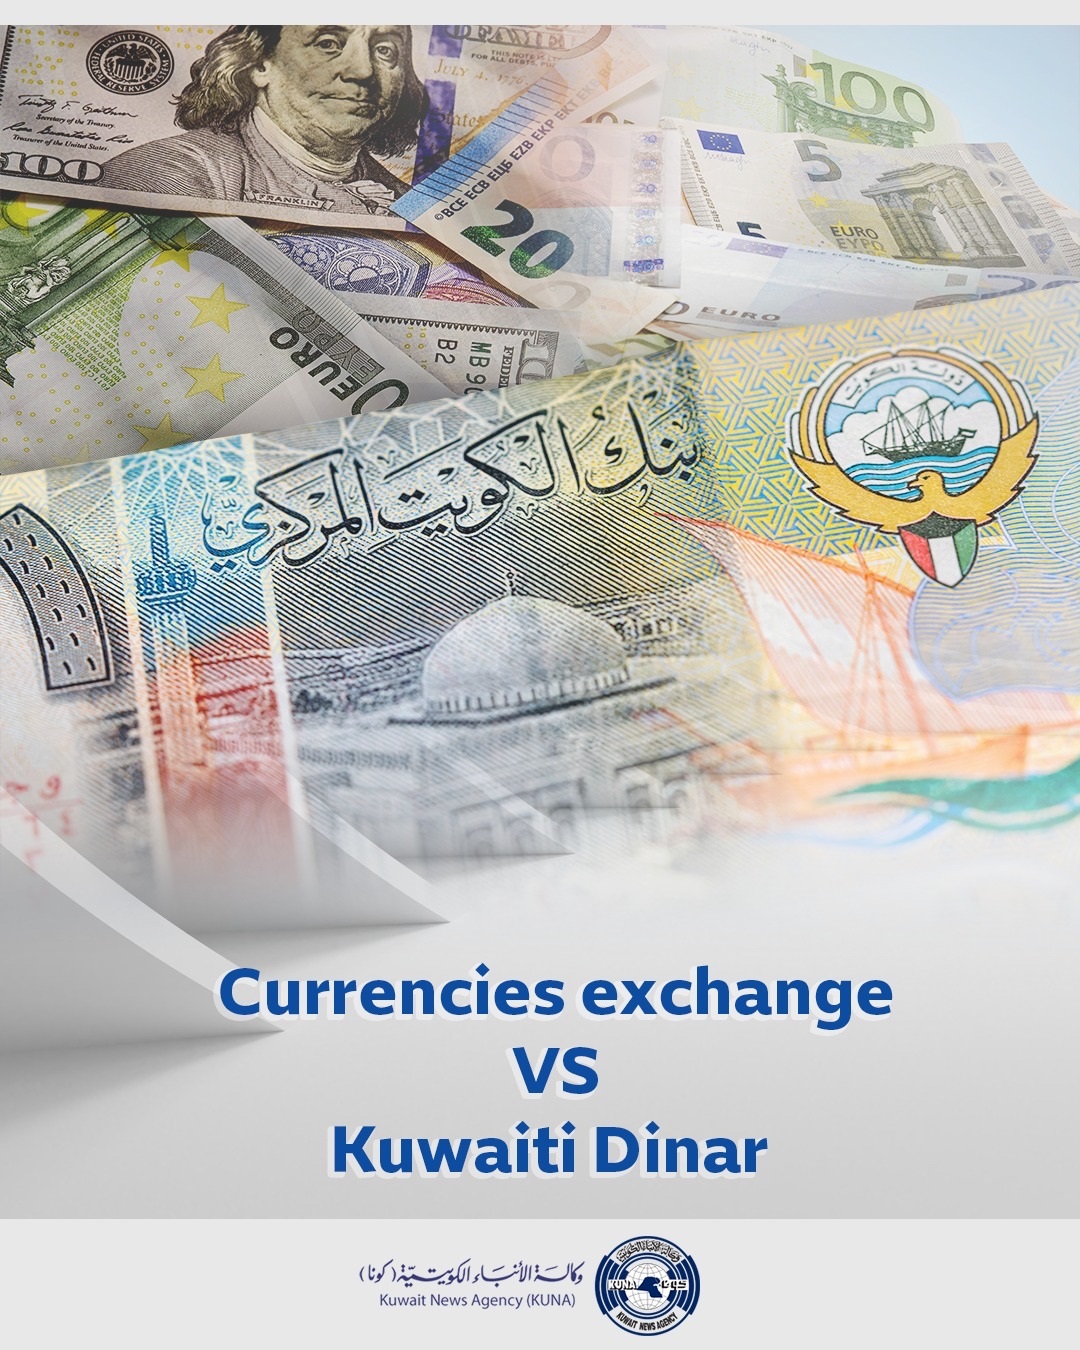 US Dollar rises to KD 0.307, EUR down to KD 0.331                                                                                                                                                                                                         